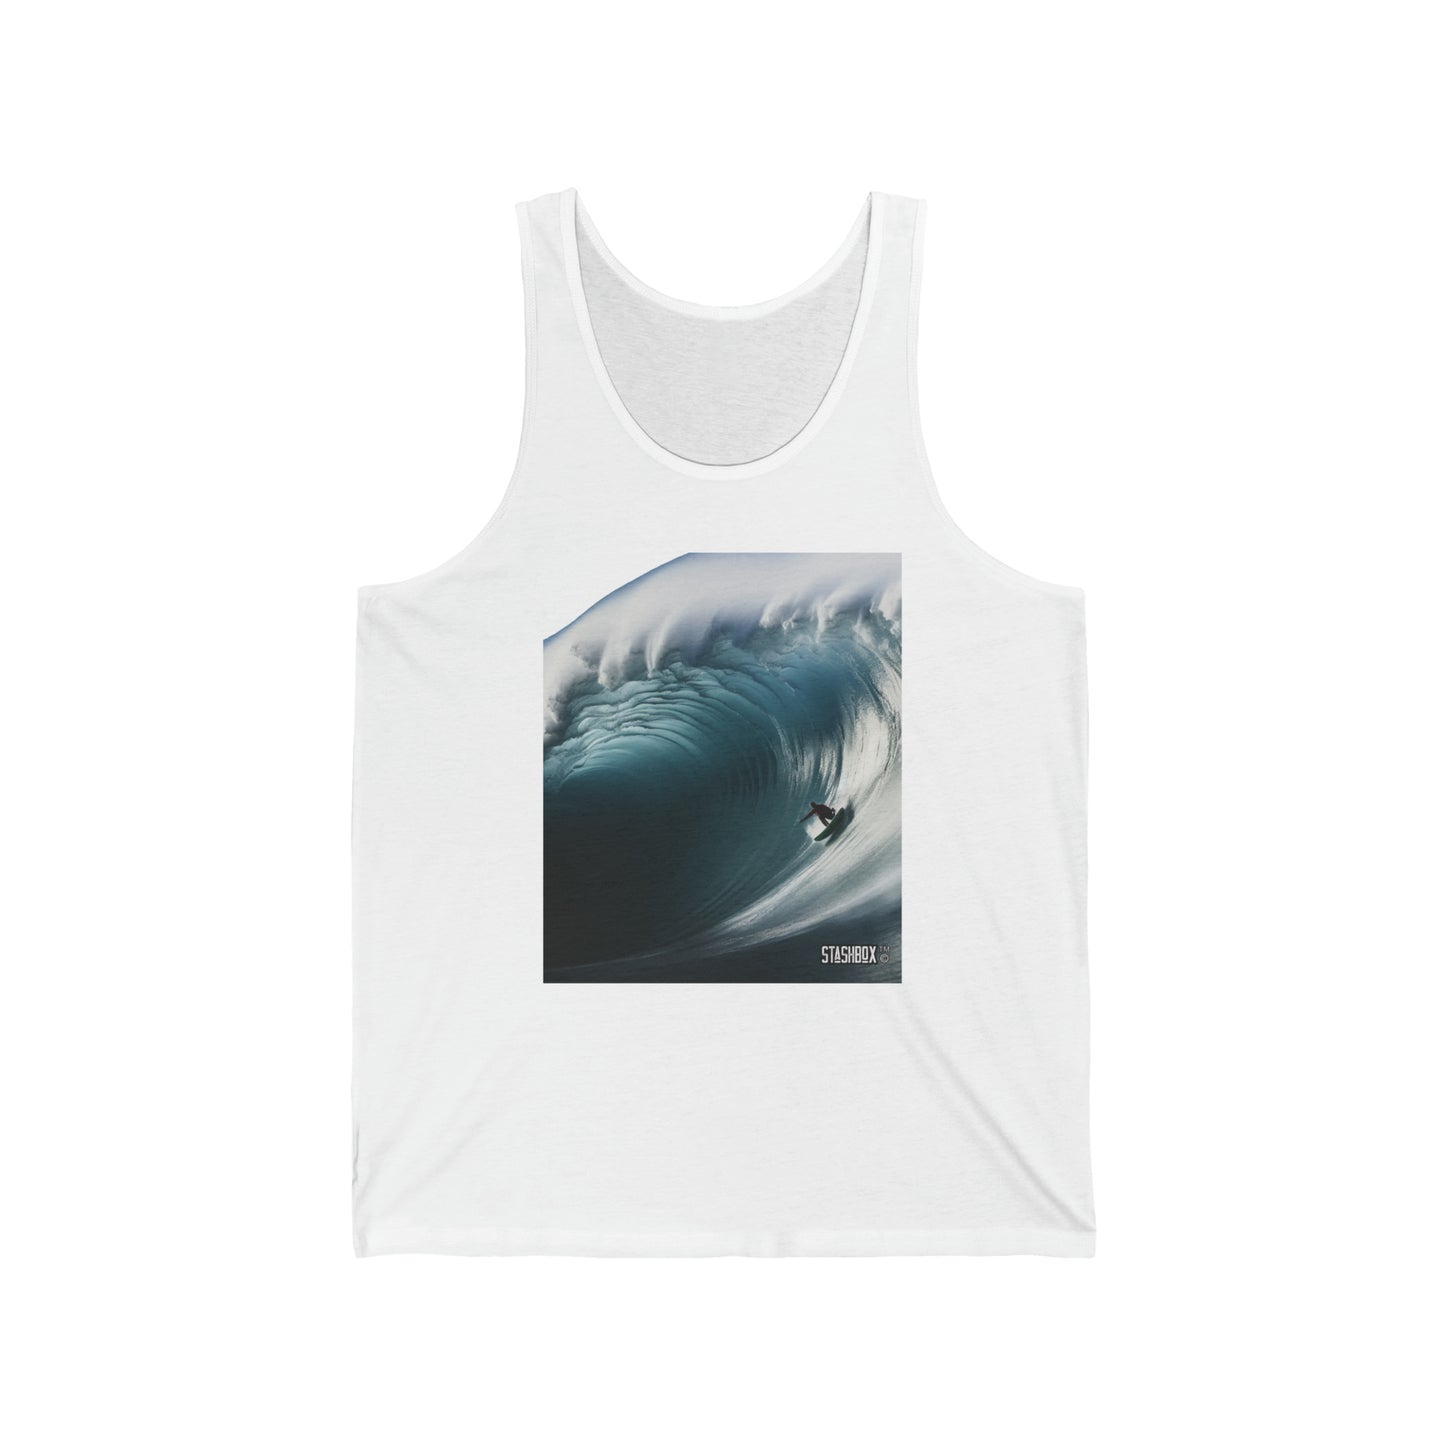 Unisex Jersey Tank Surfer Charging a Monster 61 Foot Giant Barreling Wave 61